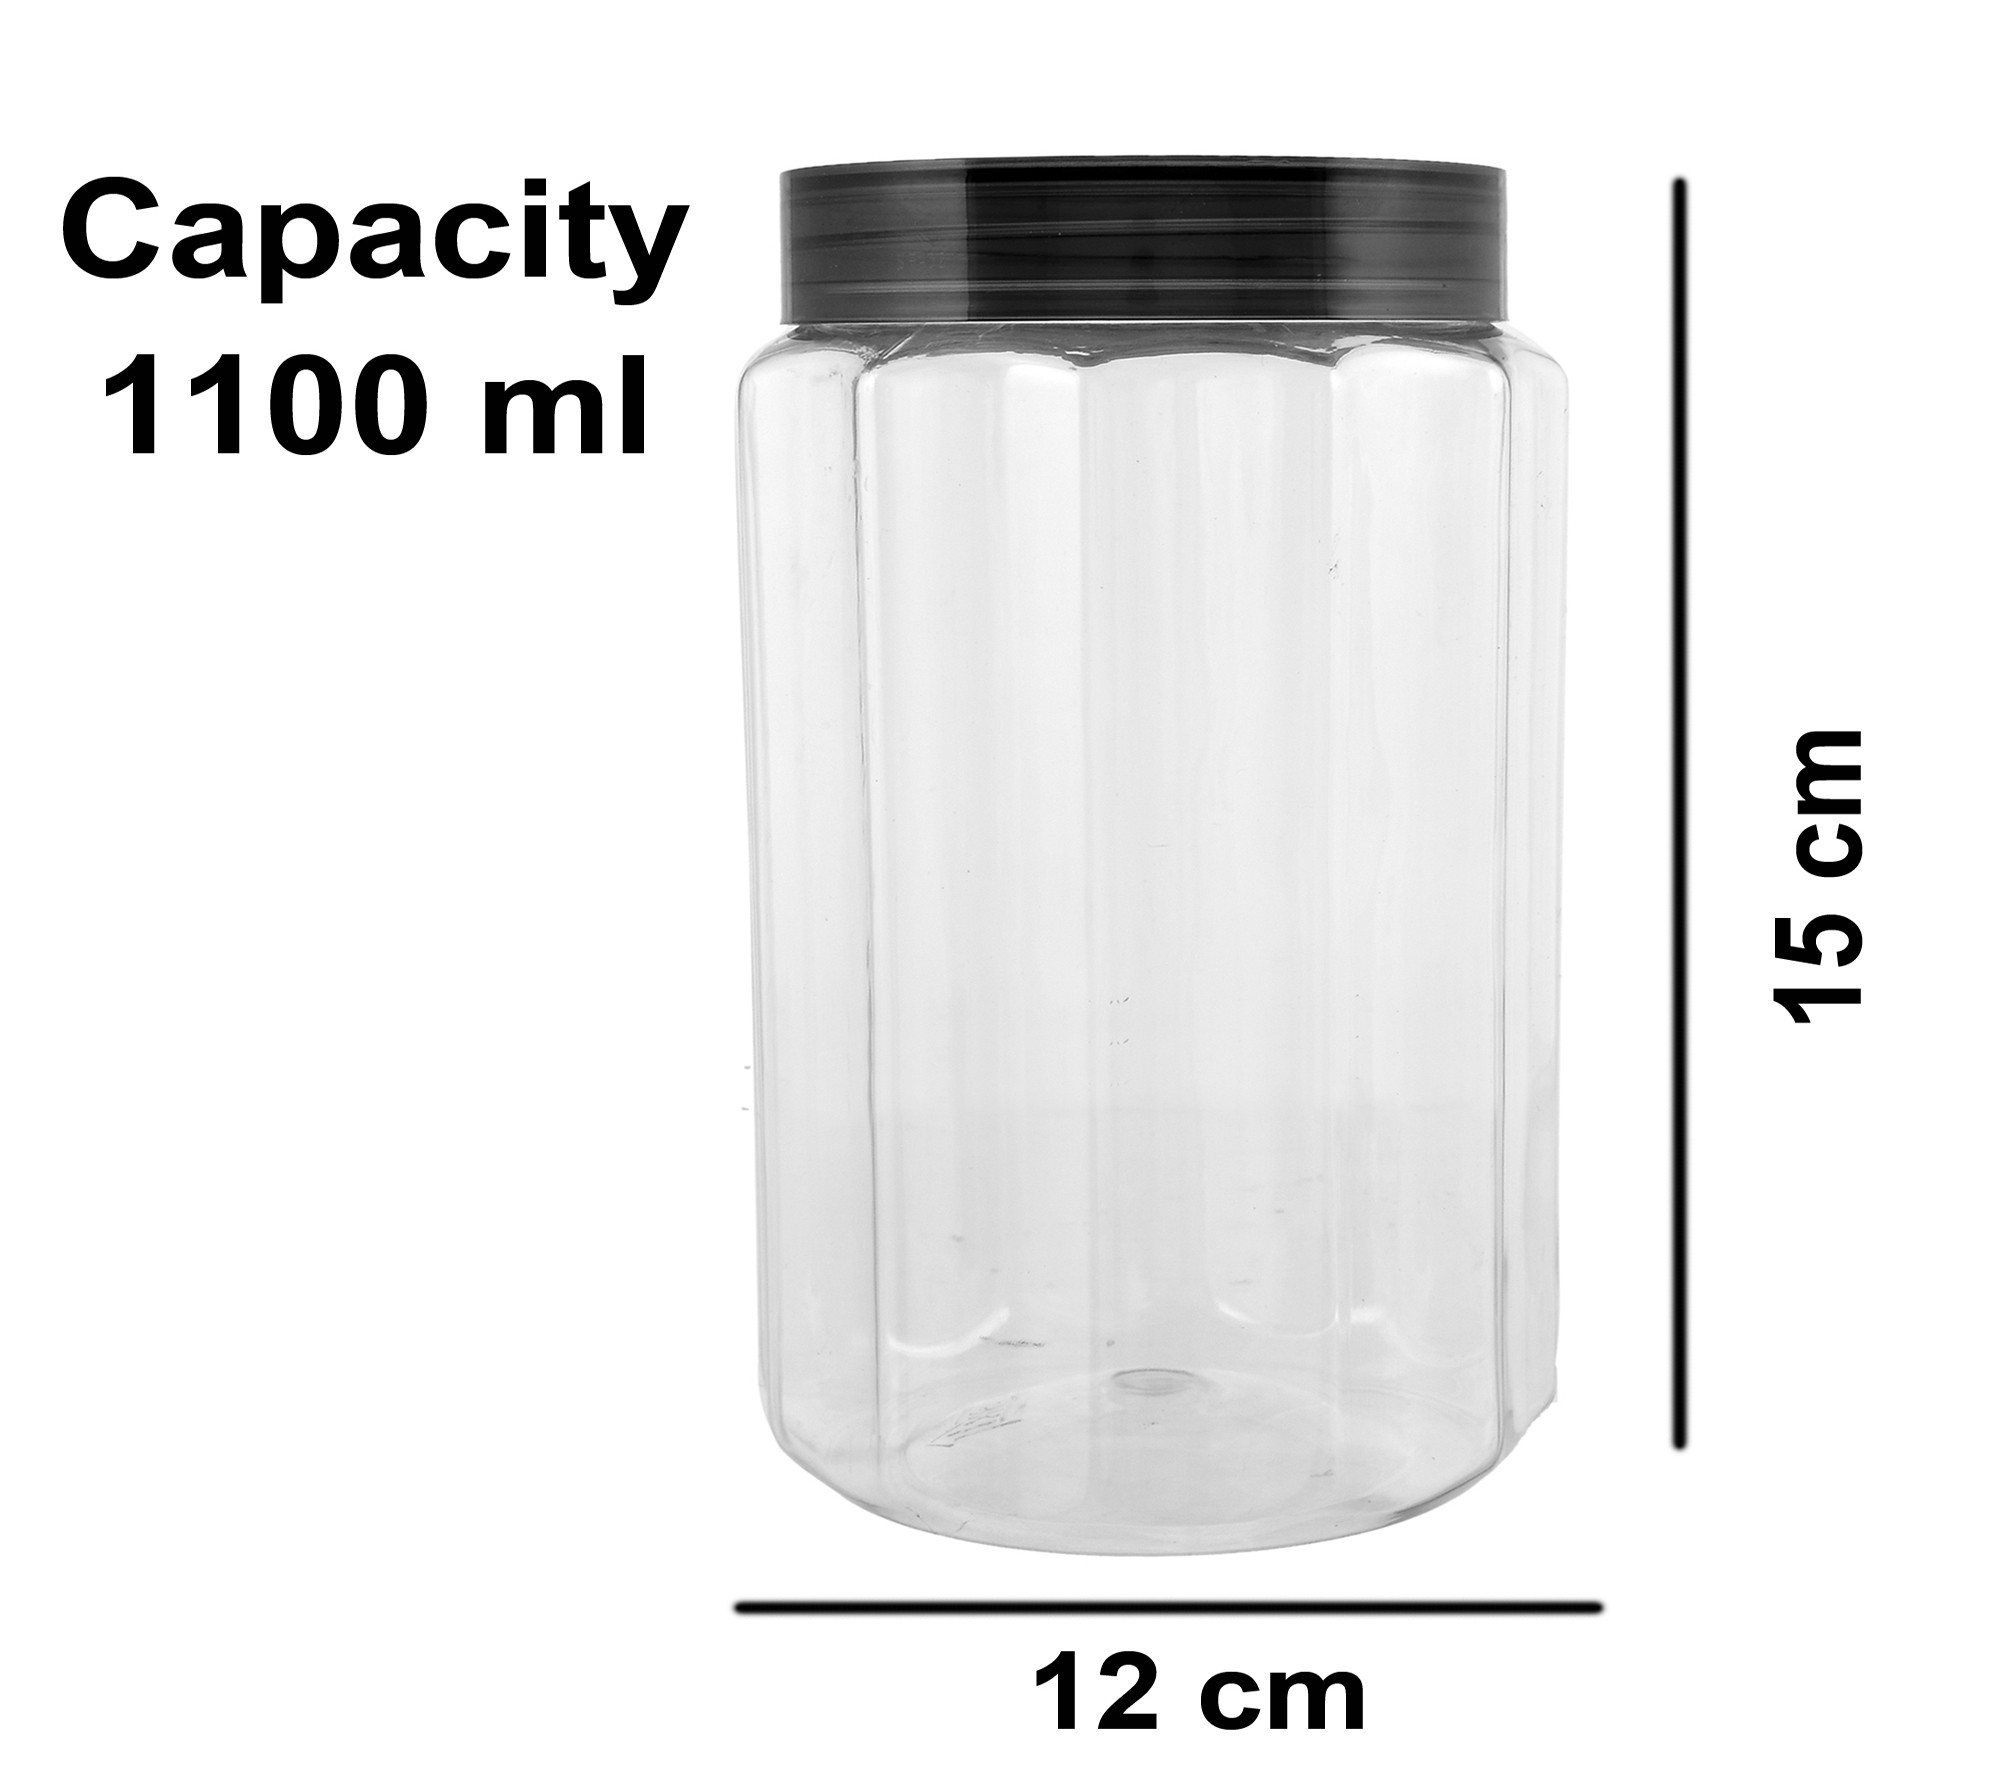 Kuber Industries Opal Airtight Food Storage Containers Kitchen Containers for Storage Set Plastic Storage Box for Kitchen Airtight Containers Storage Jar Set for Kitchen Storage (1100 ml, Grey)